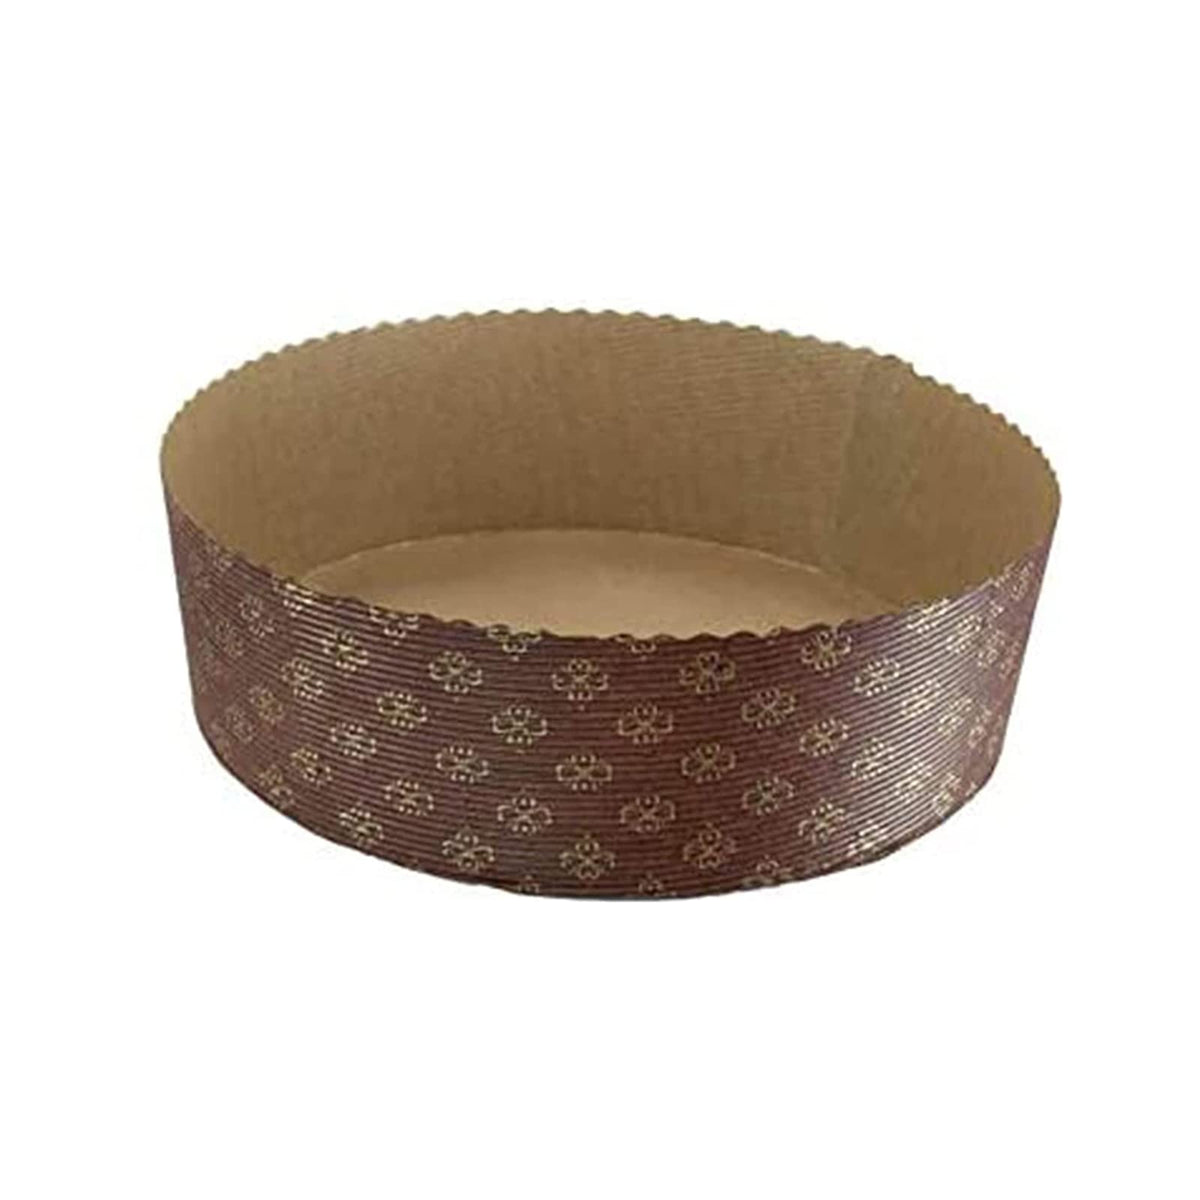 Round Paper Baking Cake Pan, Disposable Brown Baking Mold 12ct, Personal  Serving Size, All Natural Recyclable, Microwave Oven & Perfect for Muffins